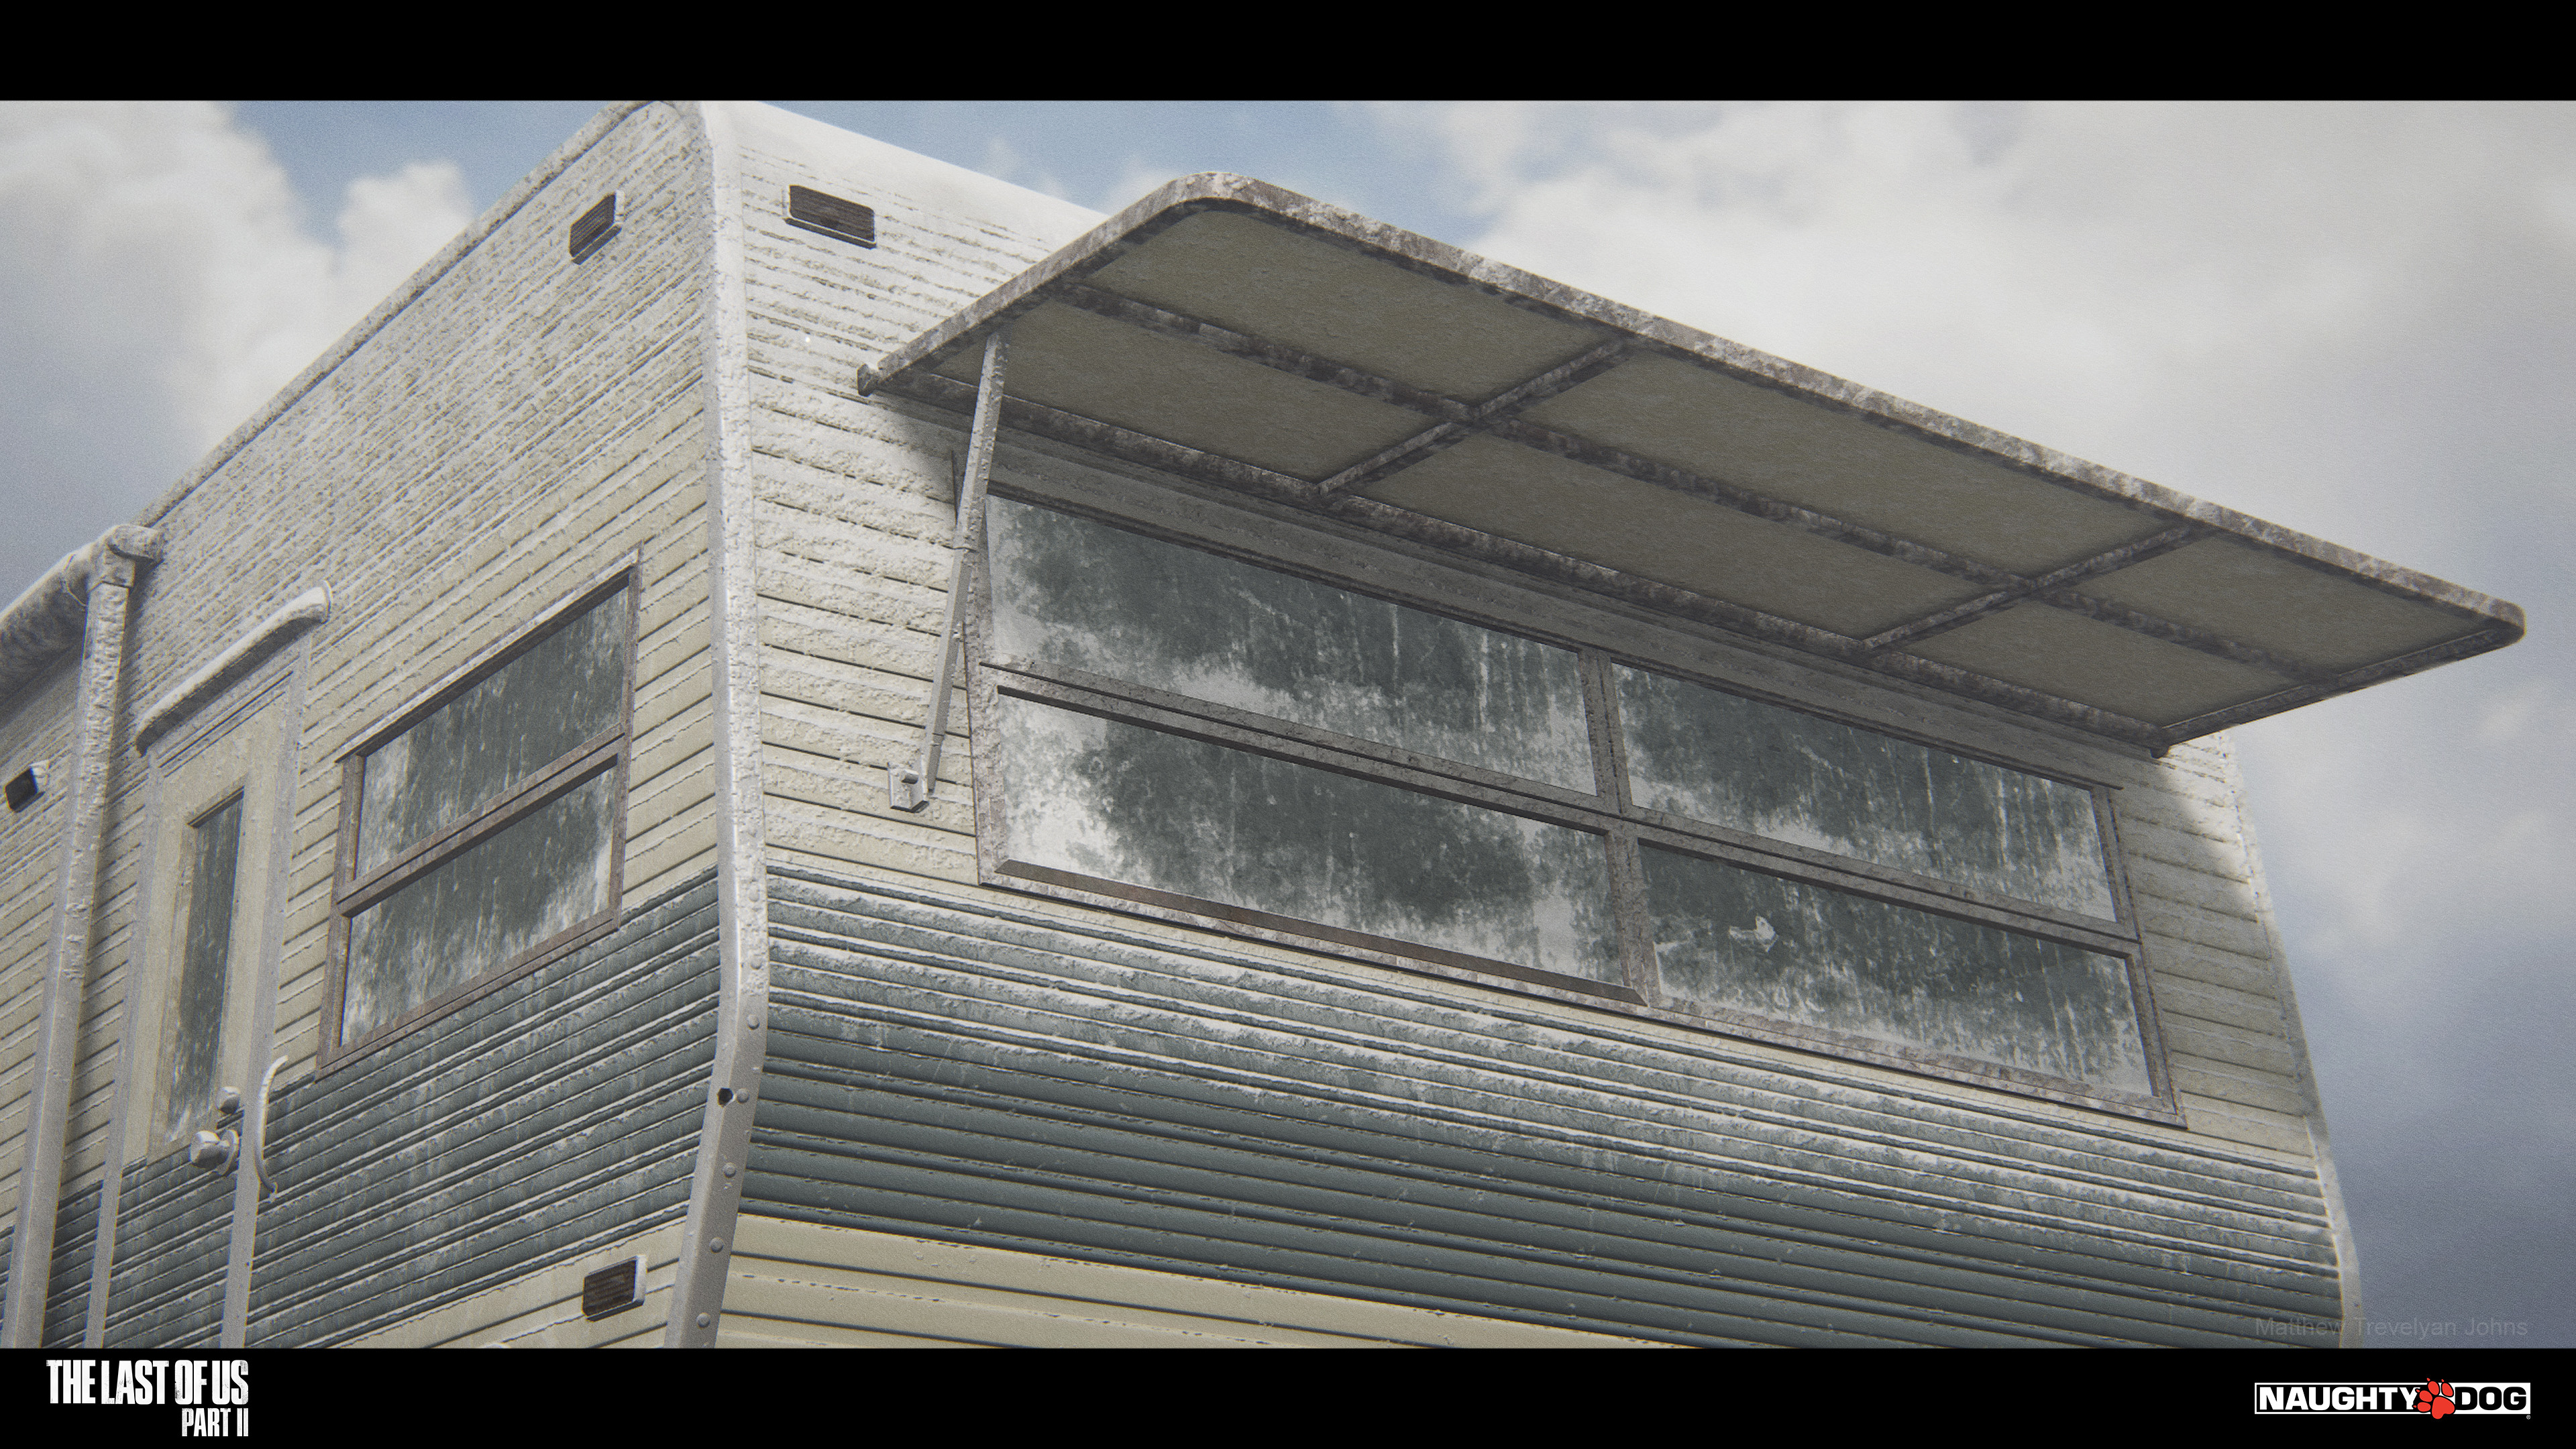 The RV that you explore at one point has a slightly different approach to the surface, using a slope blend driven by the normal detail within the texture I was able to simulate fine snow gathering along the paneling of the metal exterior